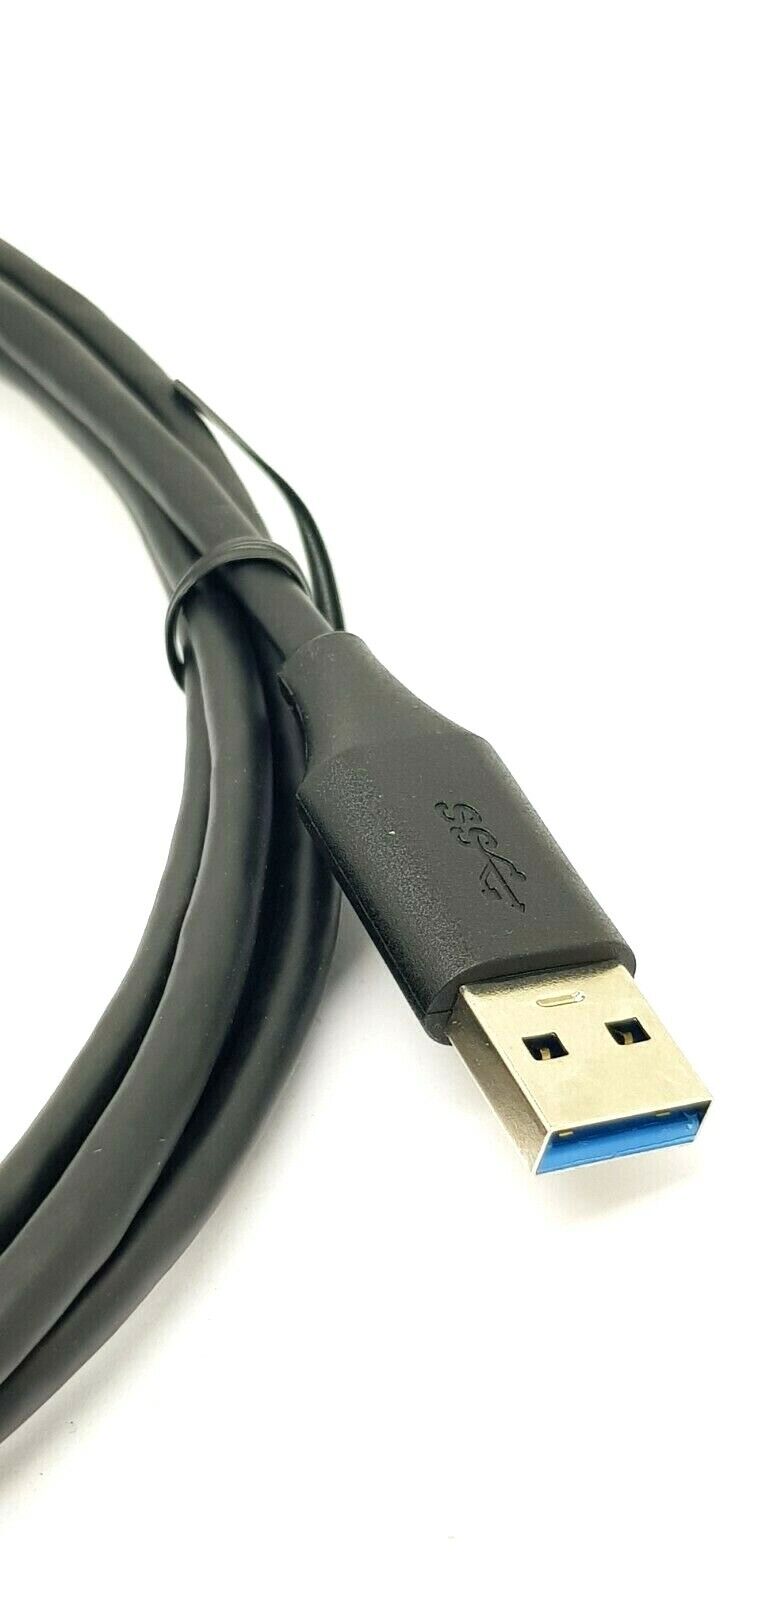 3m USB 3.0 Cable Type A to Type A Data Lead Male to Male Super Speed